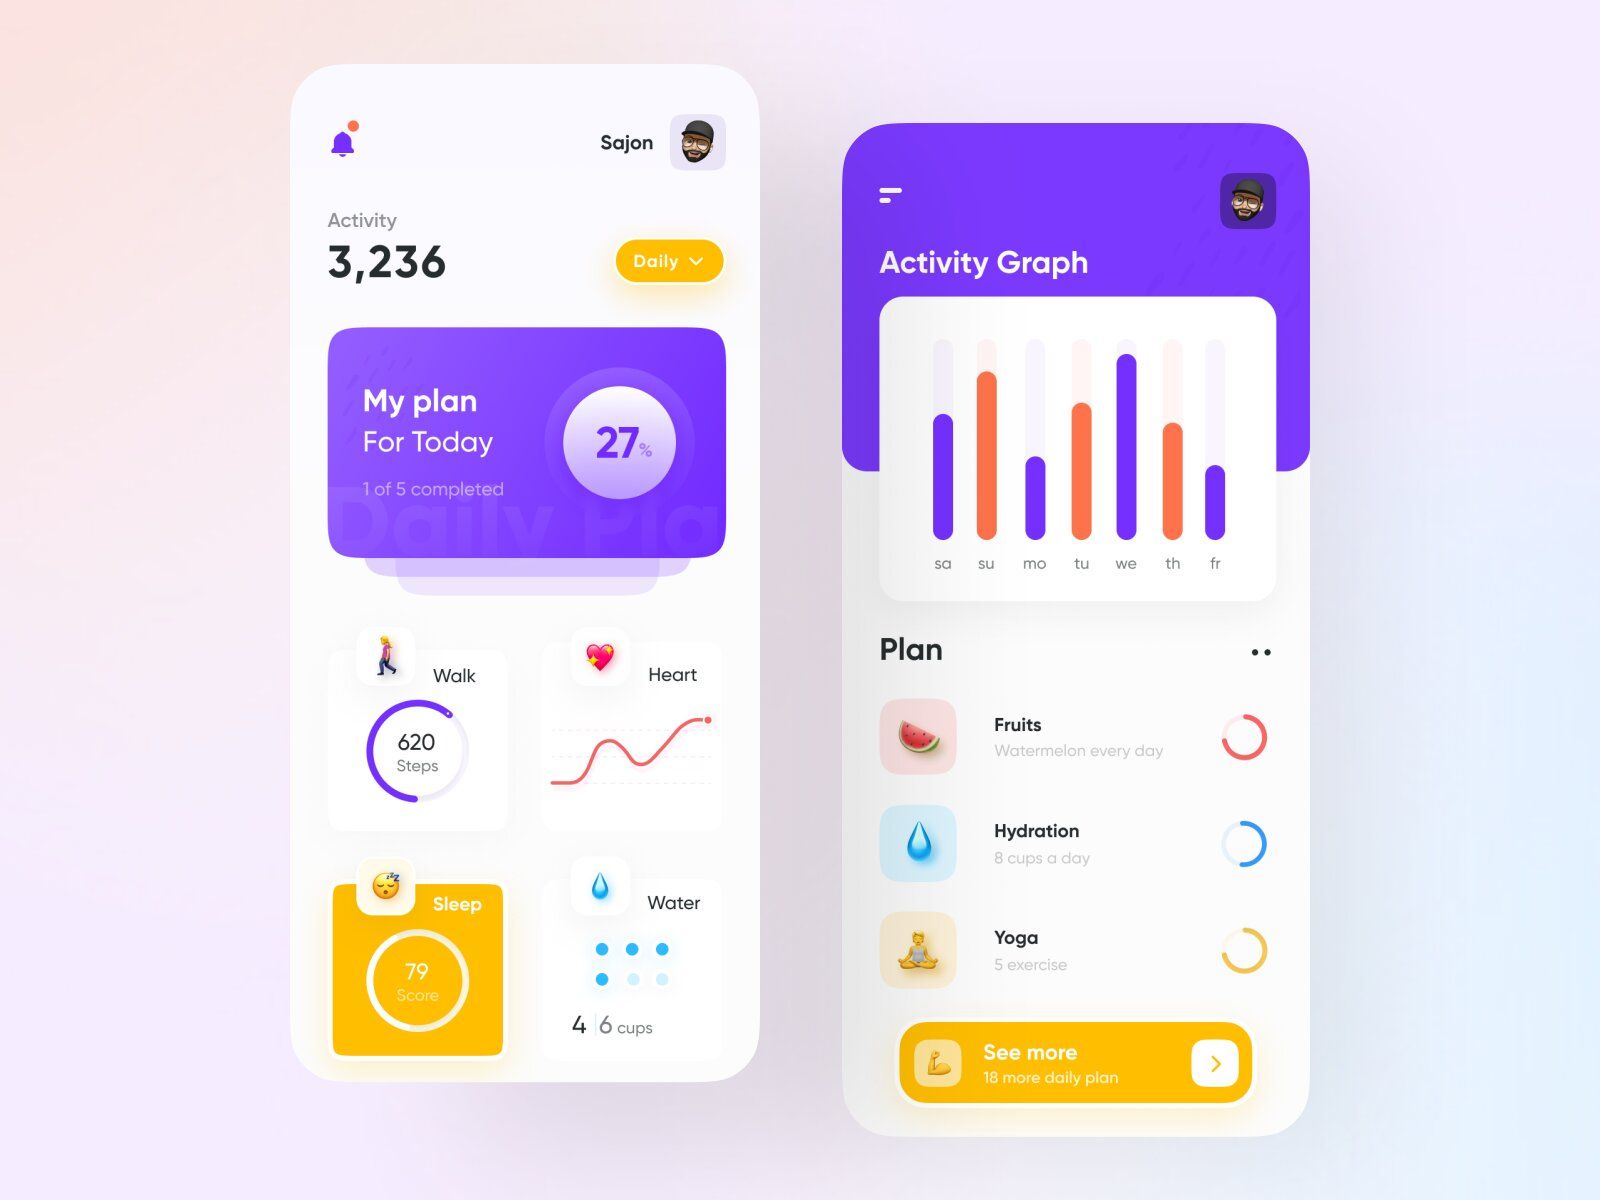 Activity tracking in a fitness app (*image by [Sajon](https://dribbble.com/sajon007){ rel="nofollow" .default-md}*)